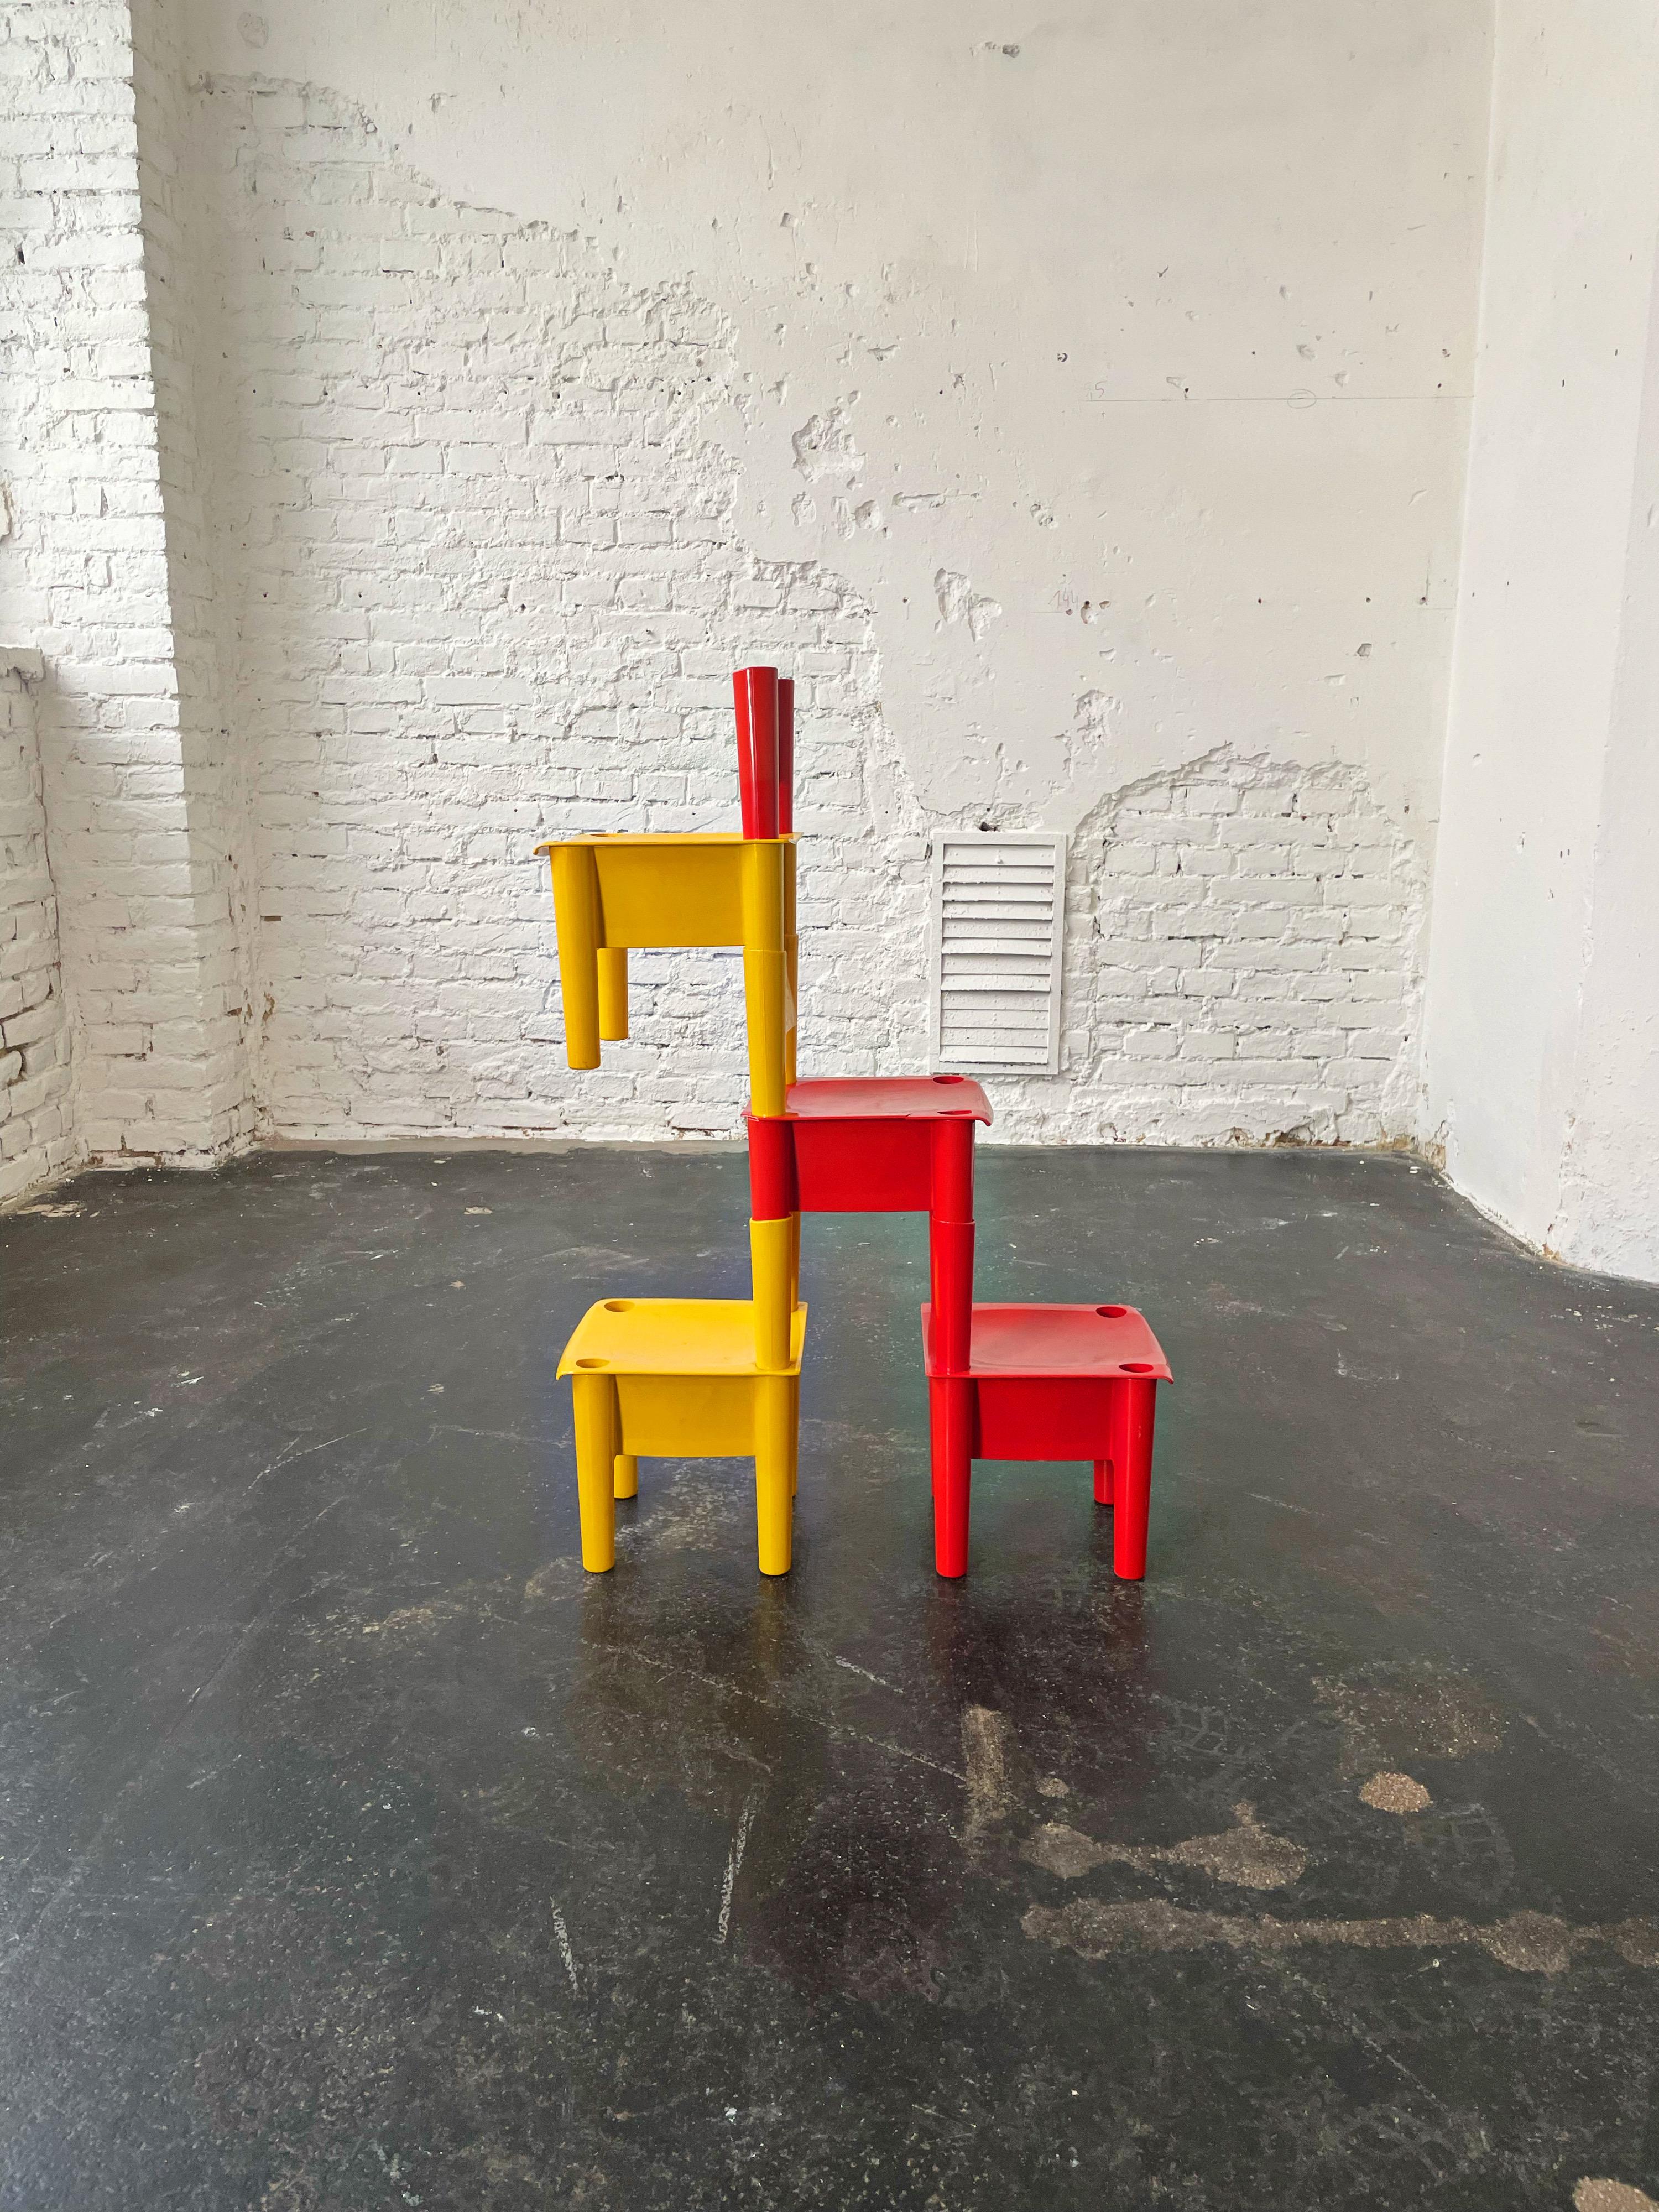 Early and very rare demountable child's chairs model Chica (also called Junior) in original condition, a modular system of plastic components that can be fitted together in a variety of ways to create seats, tables, and play structures. The